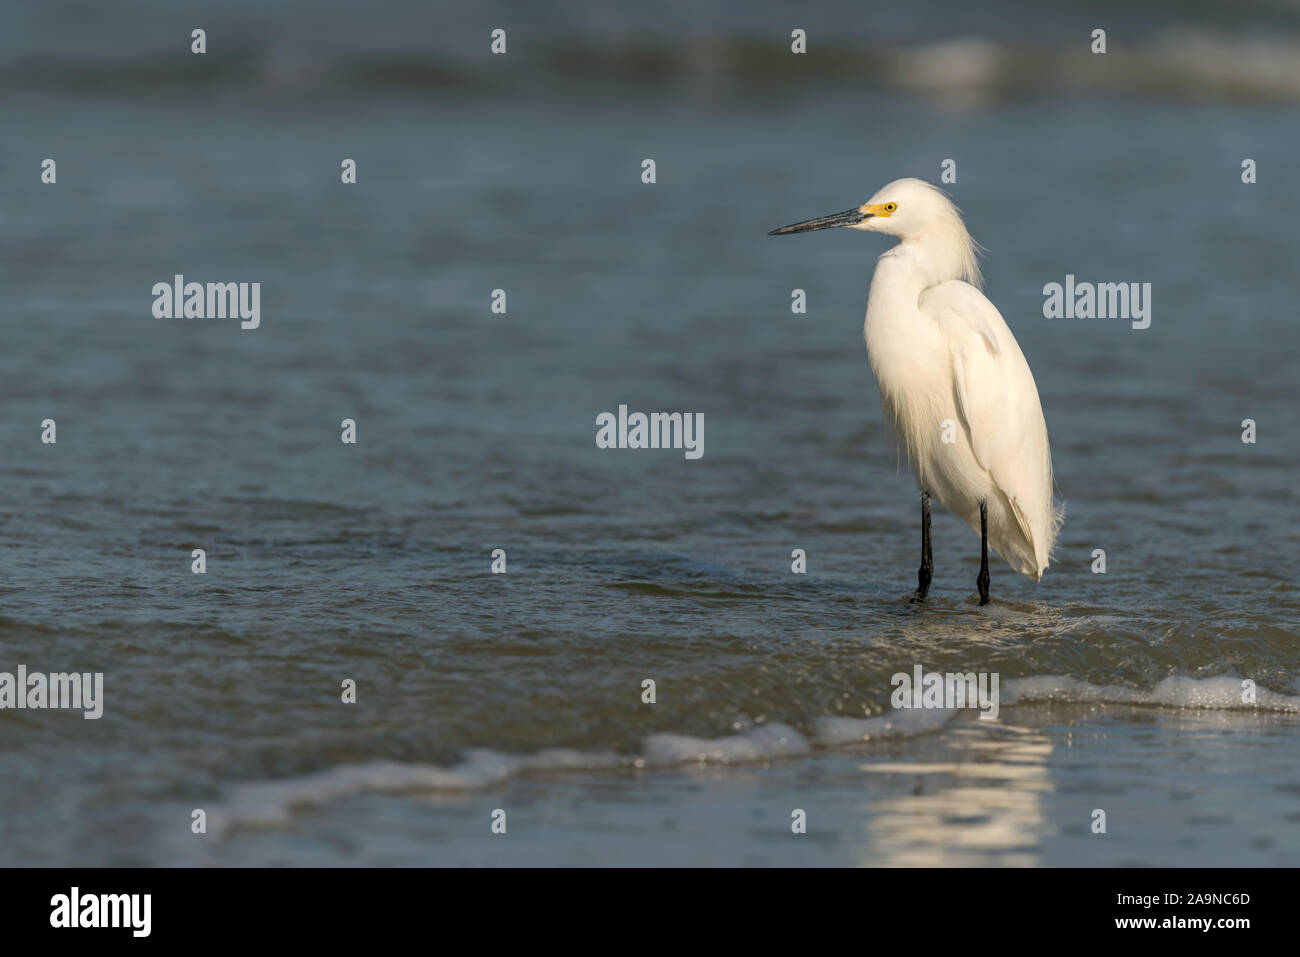 Snowy egret standing in the wave coming in off the ocean Stock Photo